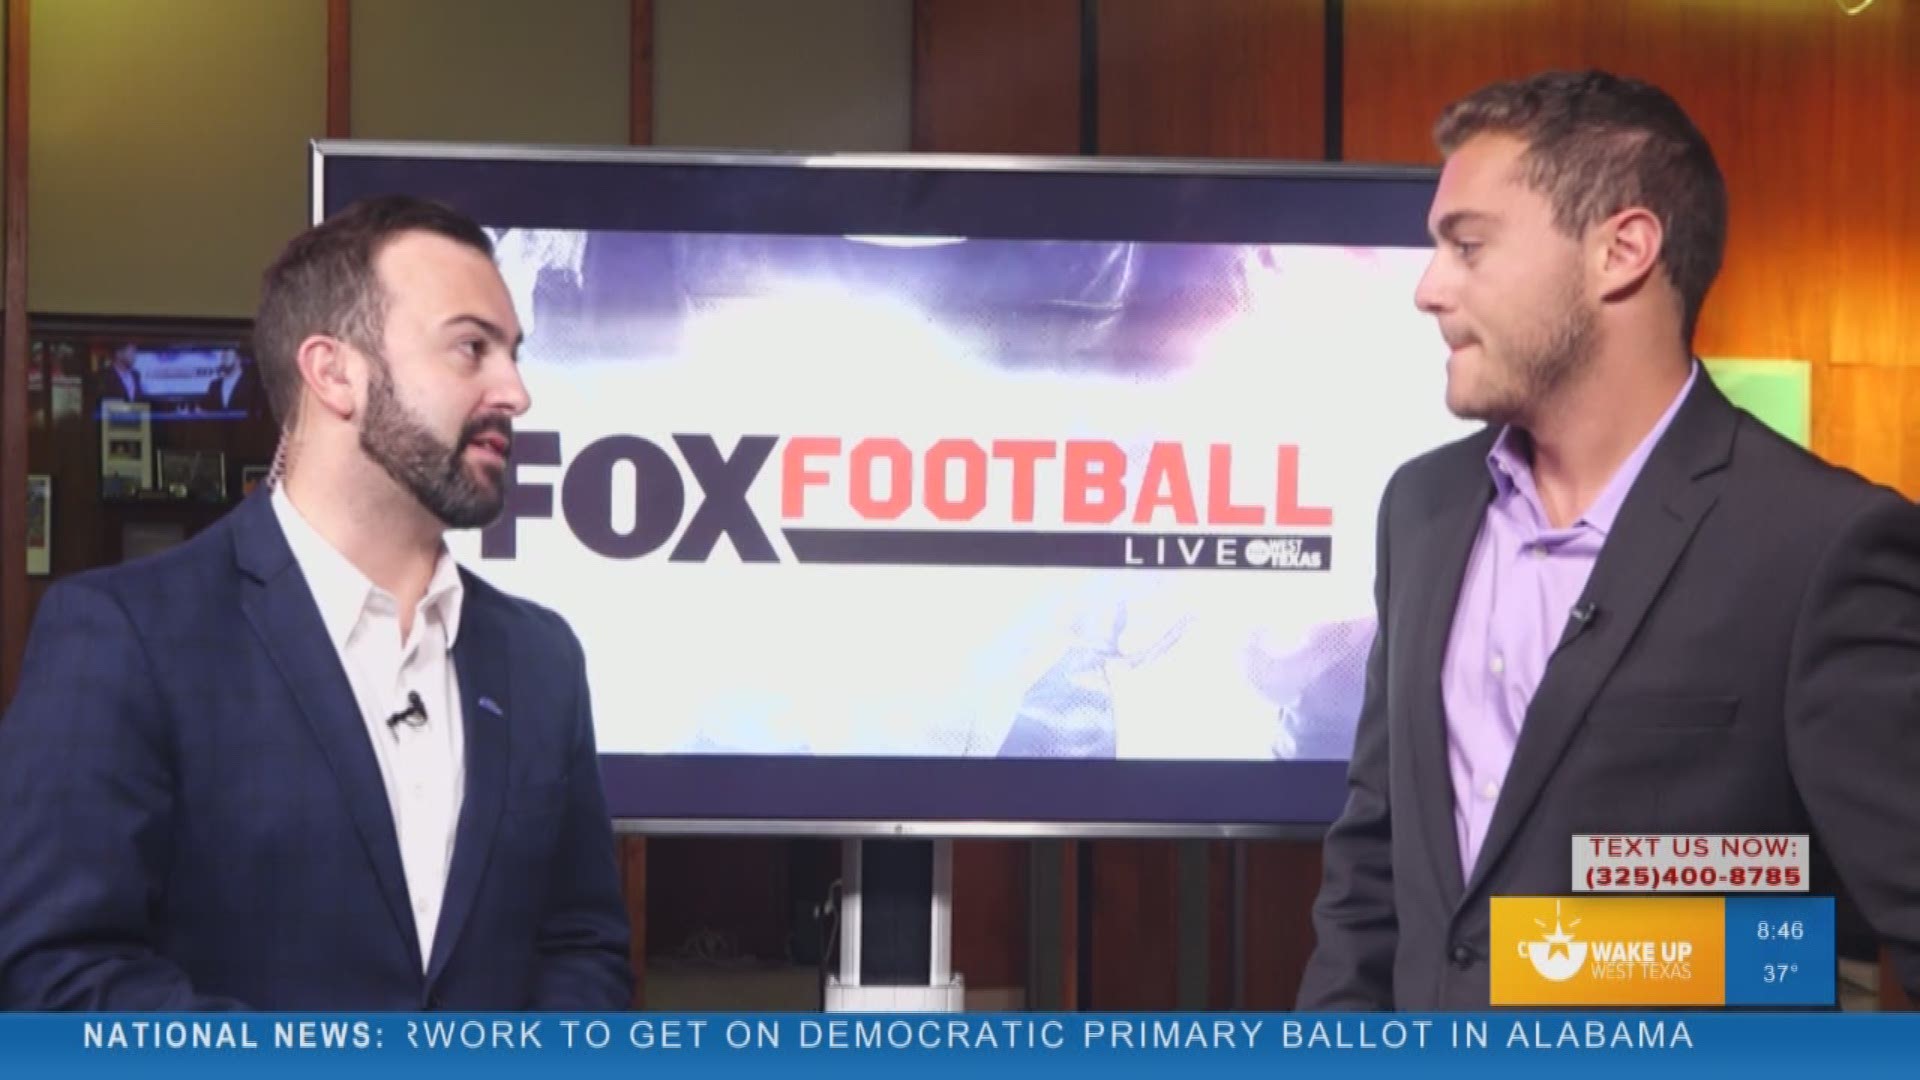 Tim O'Brien and Joe DeCarlo preview FOX Football Live's Game of the Week. The Christoval Cougars and the Eldorado Eagles.